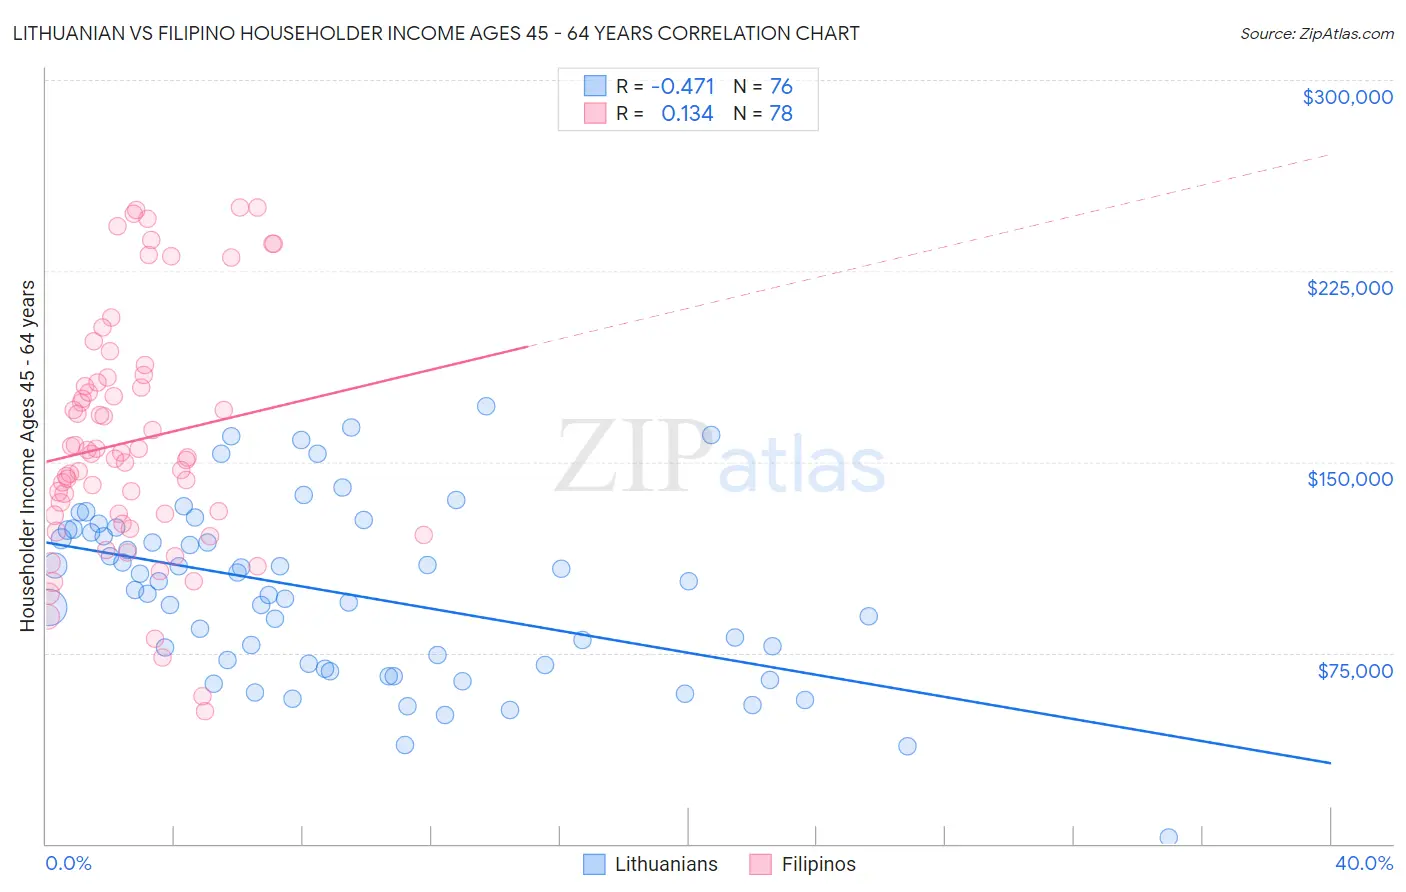 Lithuanian vs Filipino Householder Income Ages 45 - 64 years